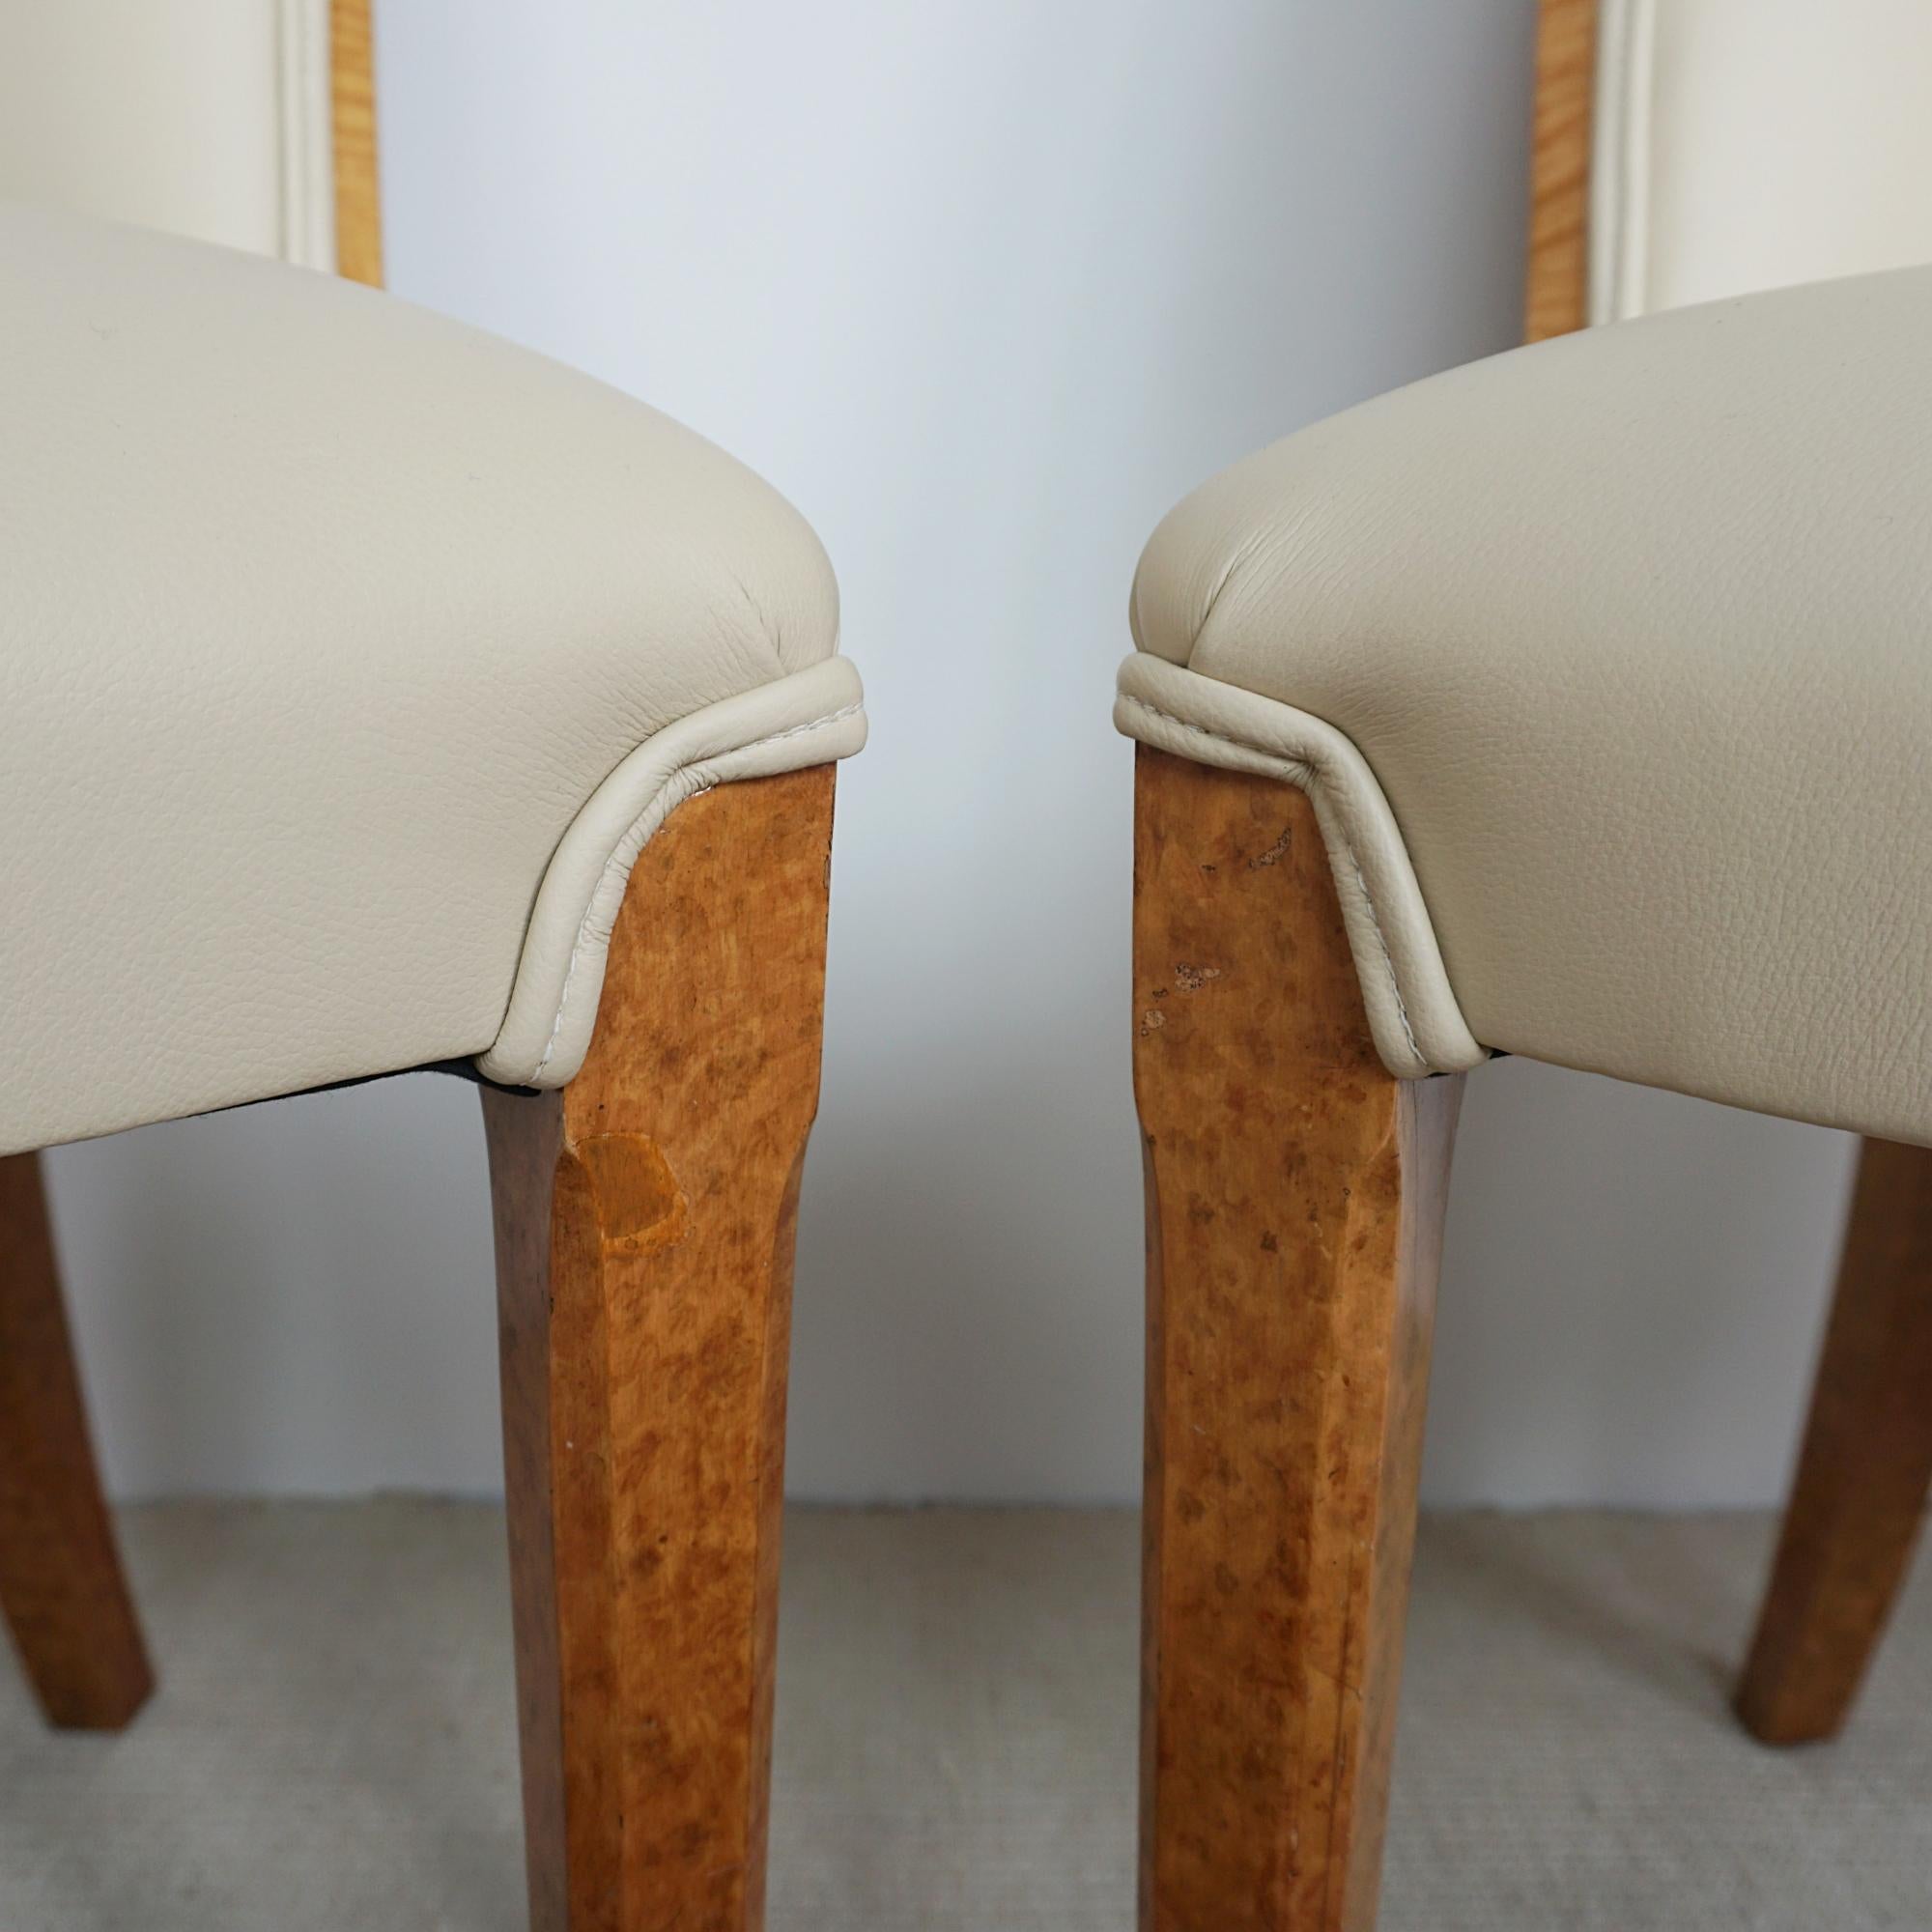 A pair of Art Deco cloud chairs by Harry & Lou Epstein. Burr walnut veneered backs with Trompe-l'œil burr walnut legs. Re-upholstered in cream leather. 

